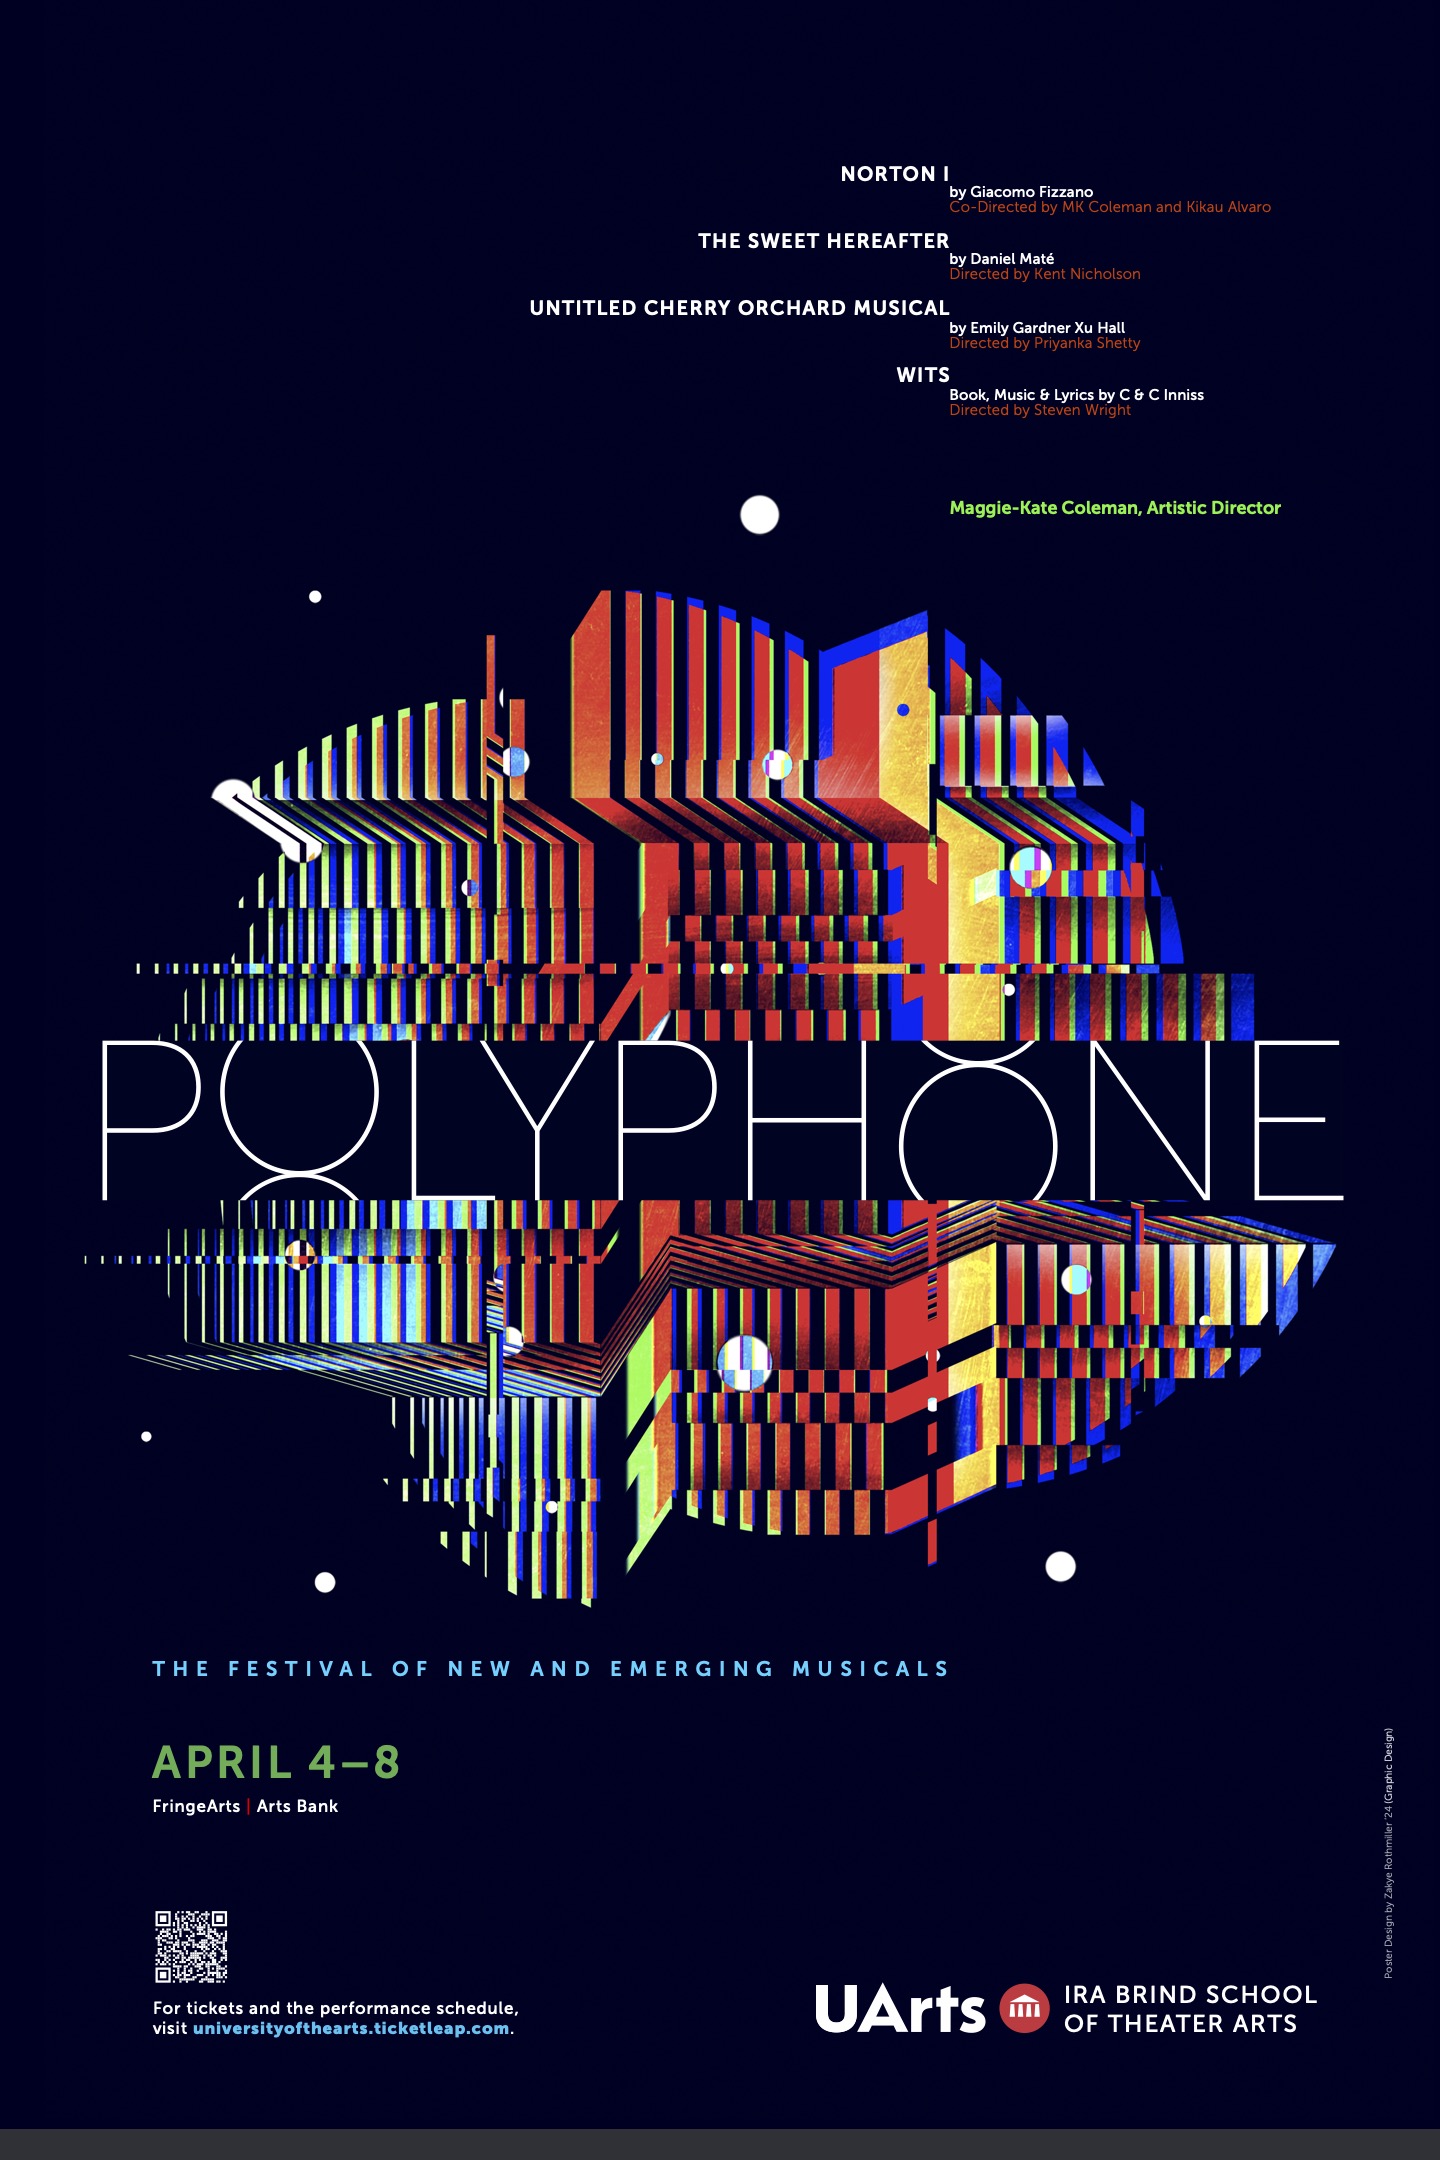 A dark blue background, in the foreground are various blocks of color (red, yellow, blue). In the center reads "Polyphone" in white letters, with "The Festival of New and Emerging Musicals" below in blue. "April 4–8" in green text, "FringeArts, Arts Bank" in white, the names of productions in white text, and "Maggie-Kate Coleman, Artistic Director" in green. 